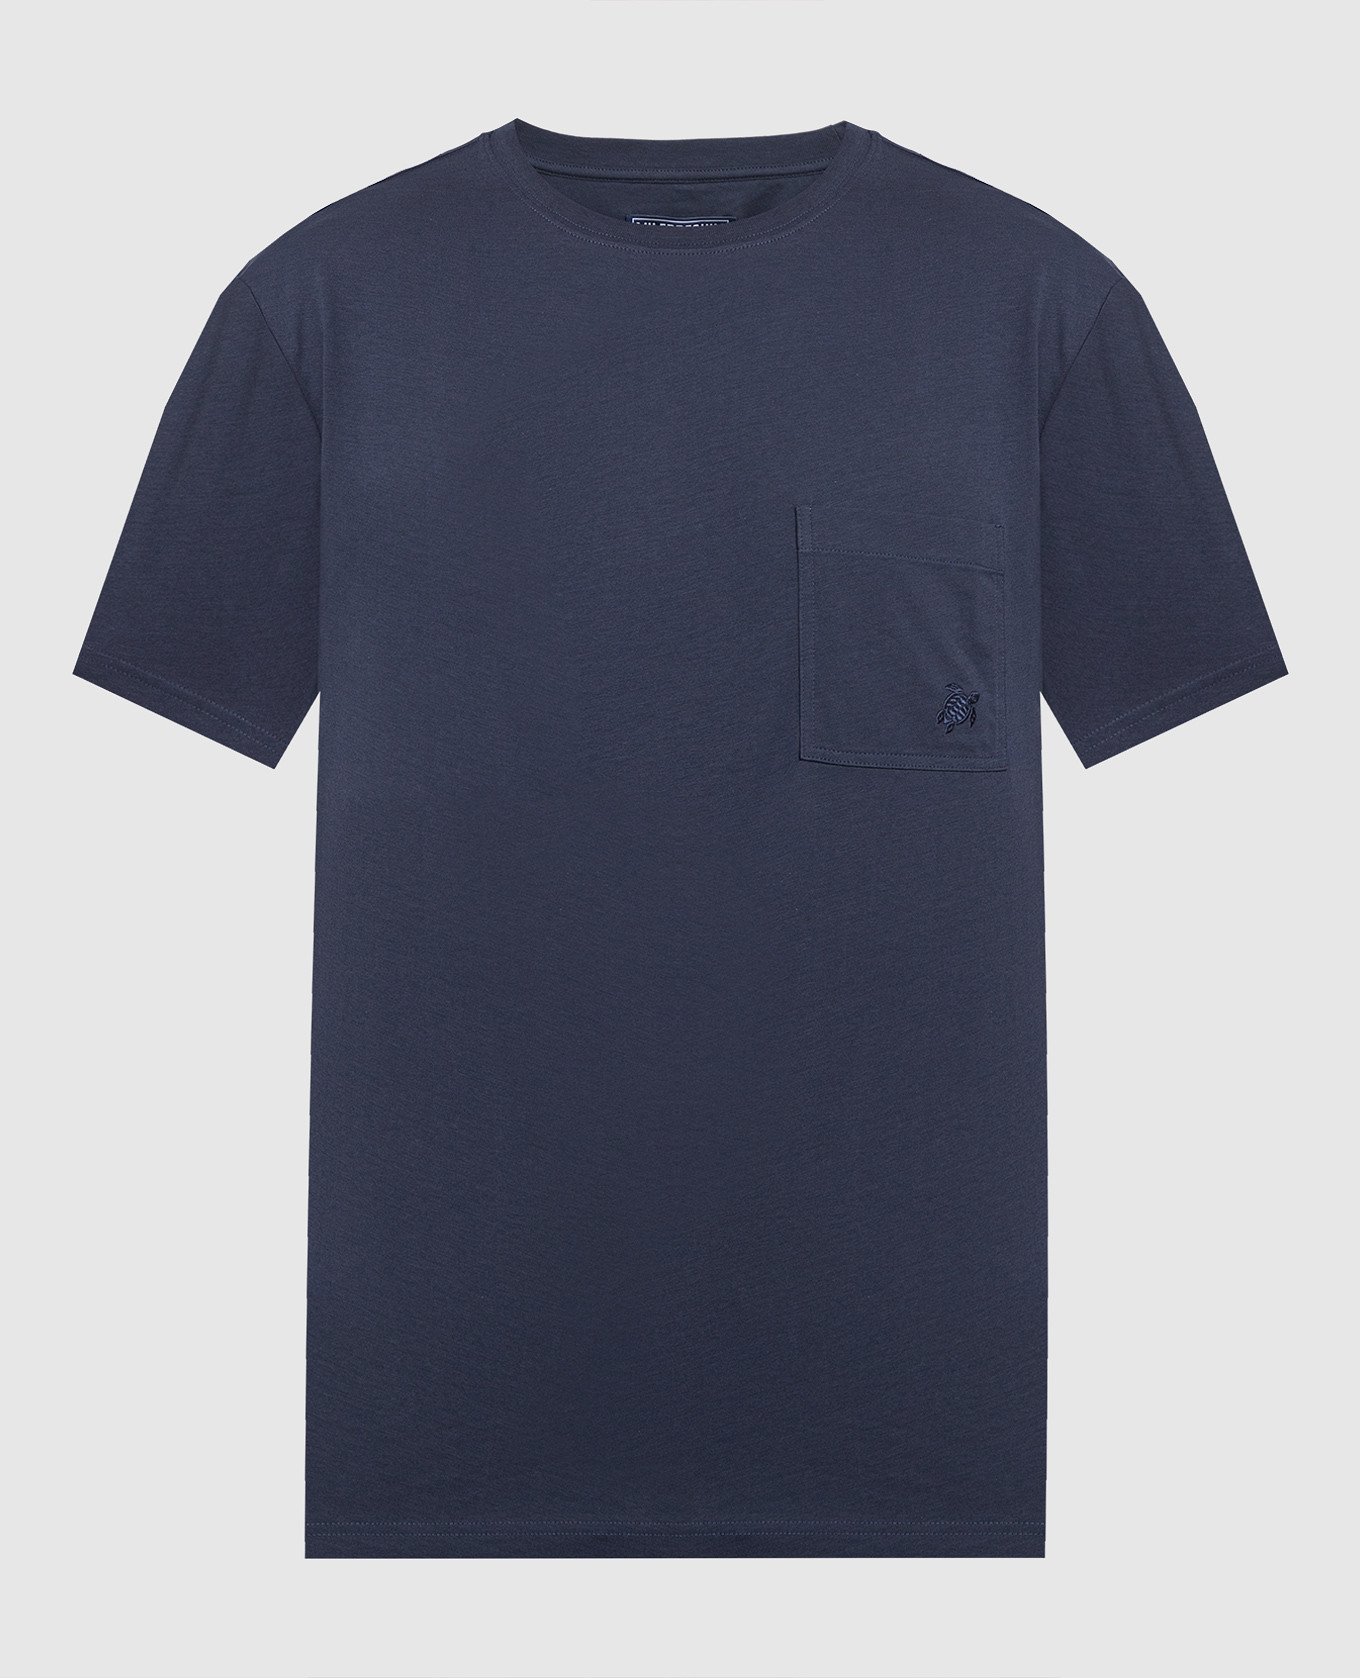 Titan blue t-shirt with logo embroidery